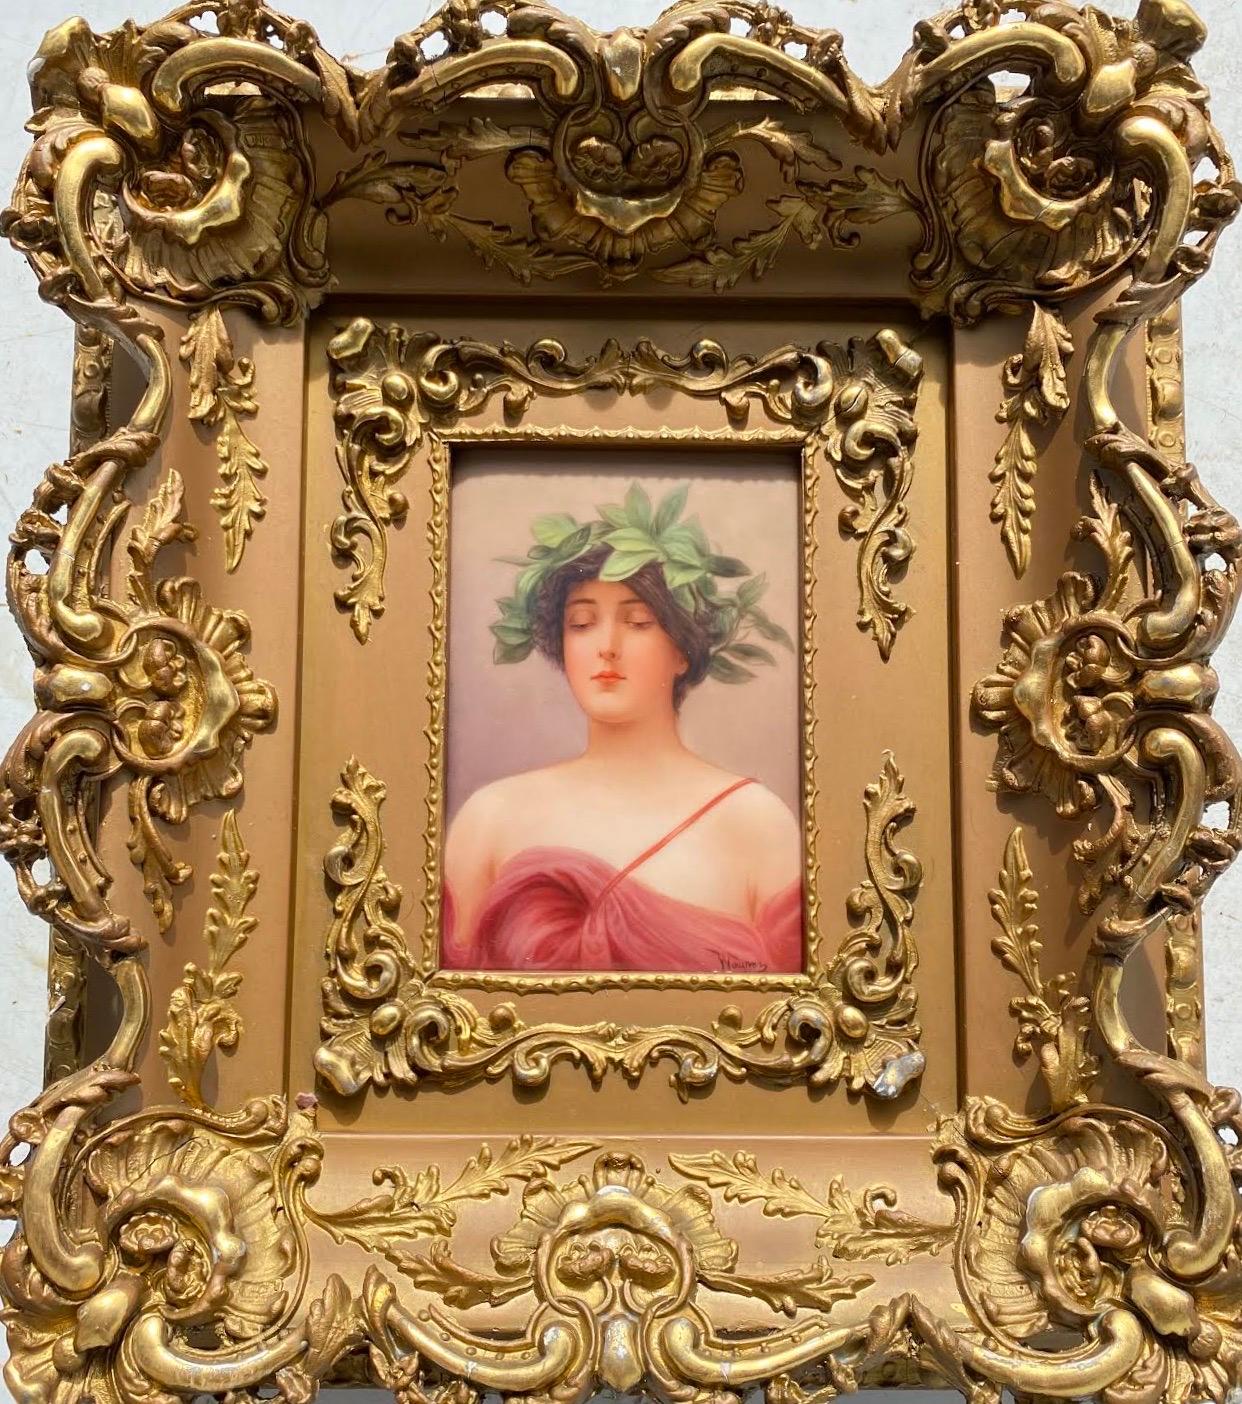 Neoclassical Wagner Porcelain Plaque Portrait of 'Daphne' by C.M. Hutschenreuther For Sale